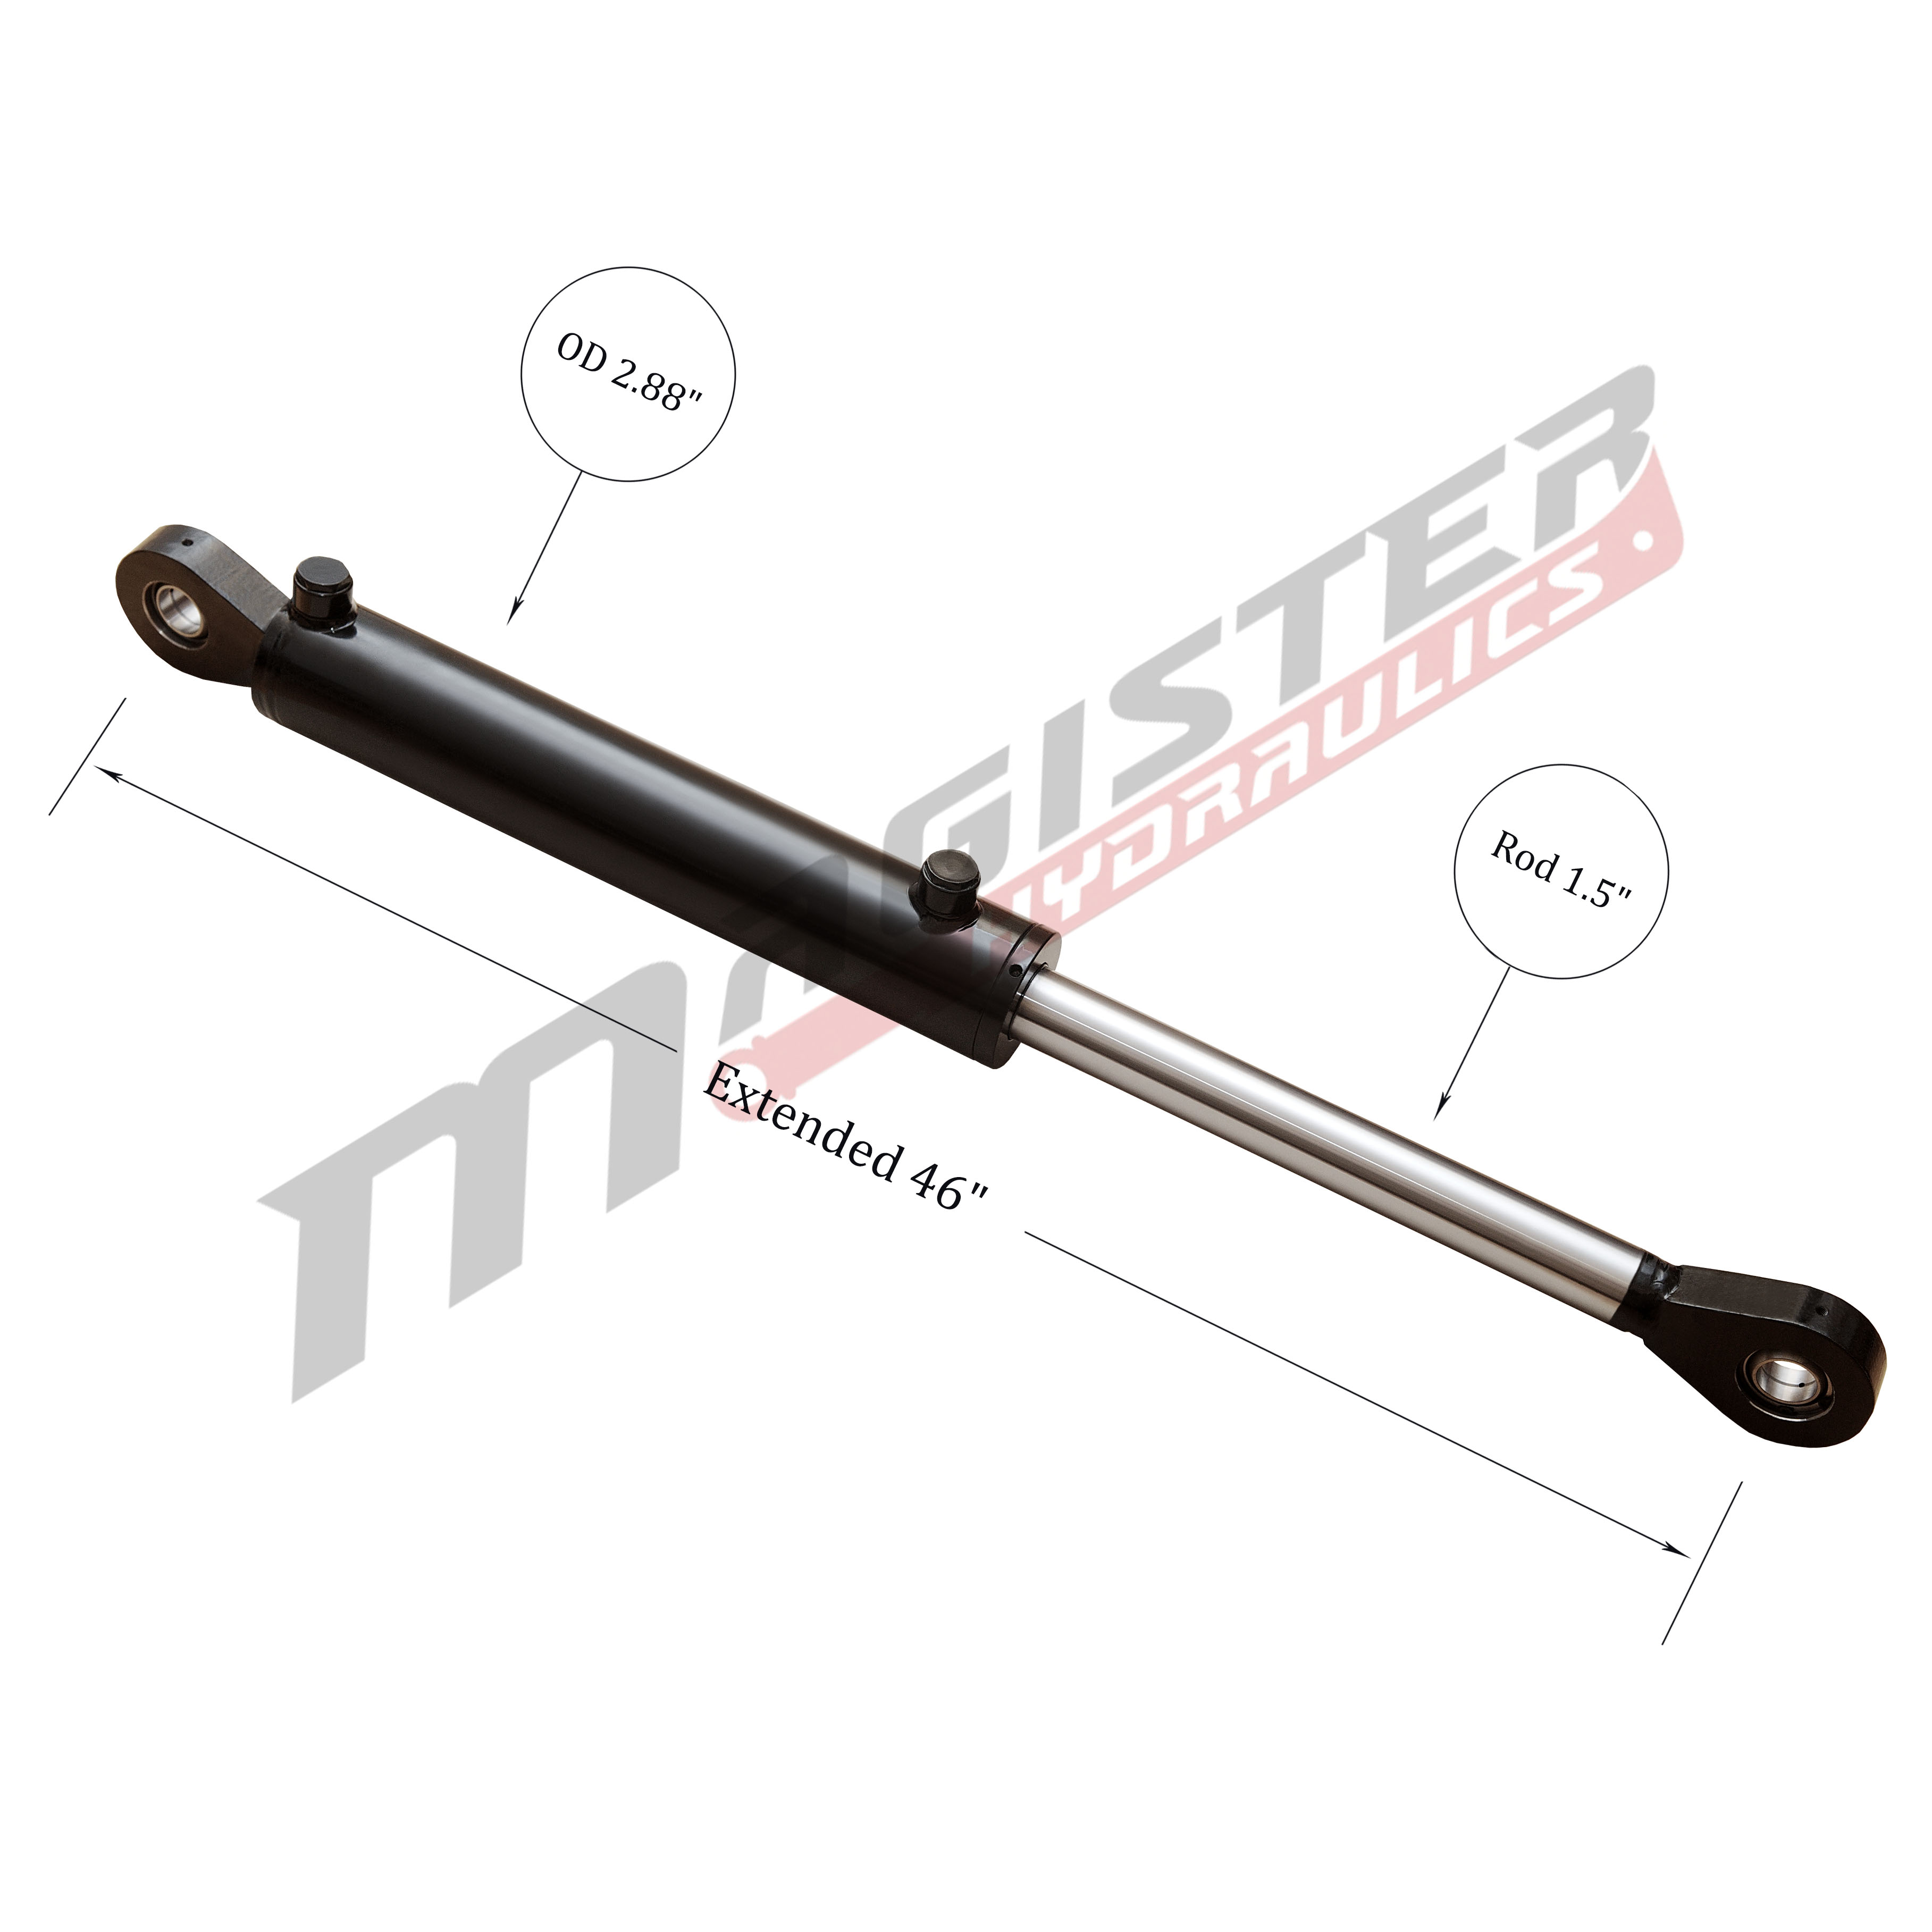 2.5 bore x 18 stroke hydraulic cylinder, welded swivel eye double acting cylinder | Magister Hydraulics